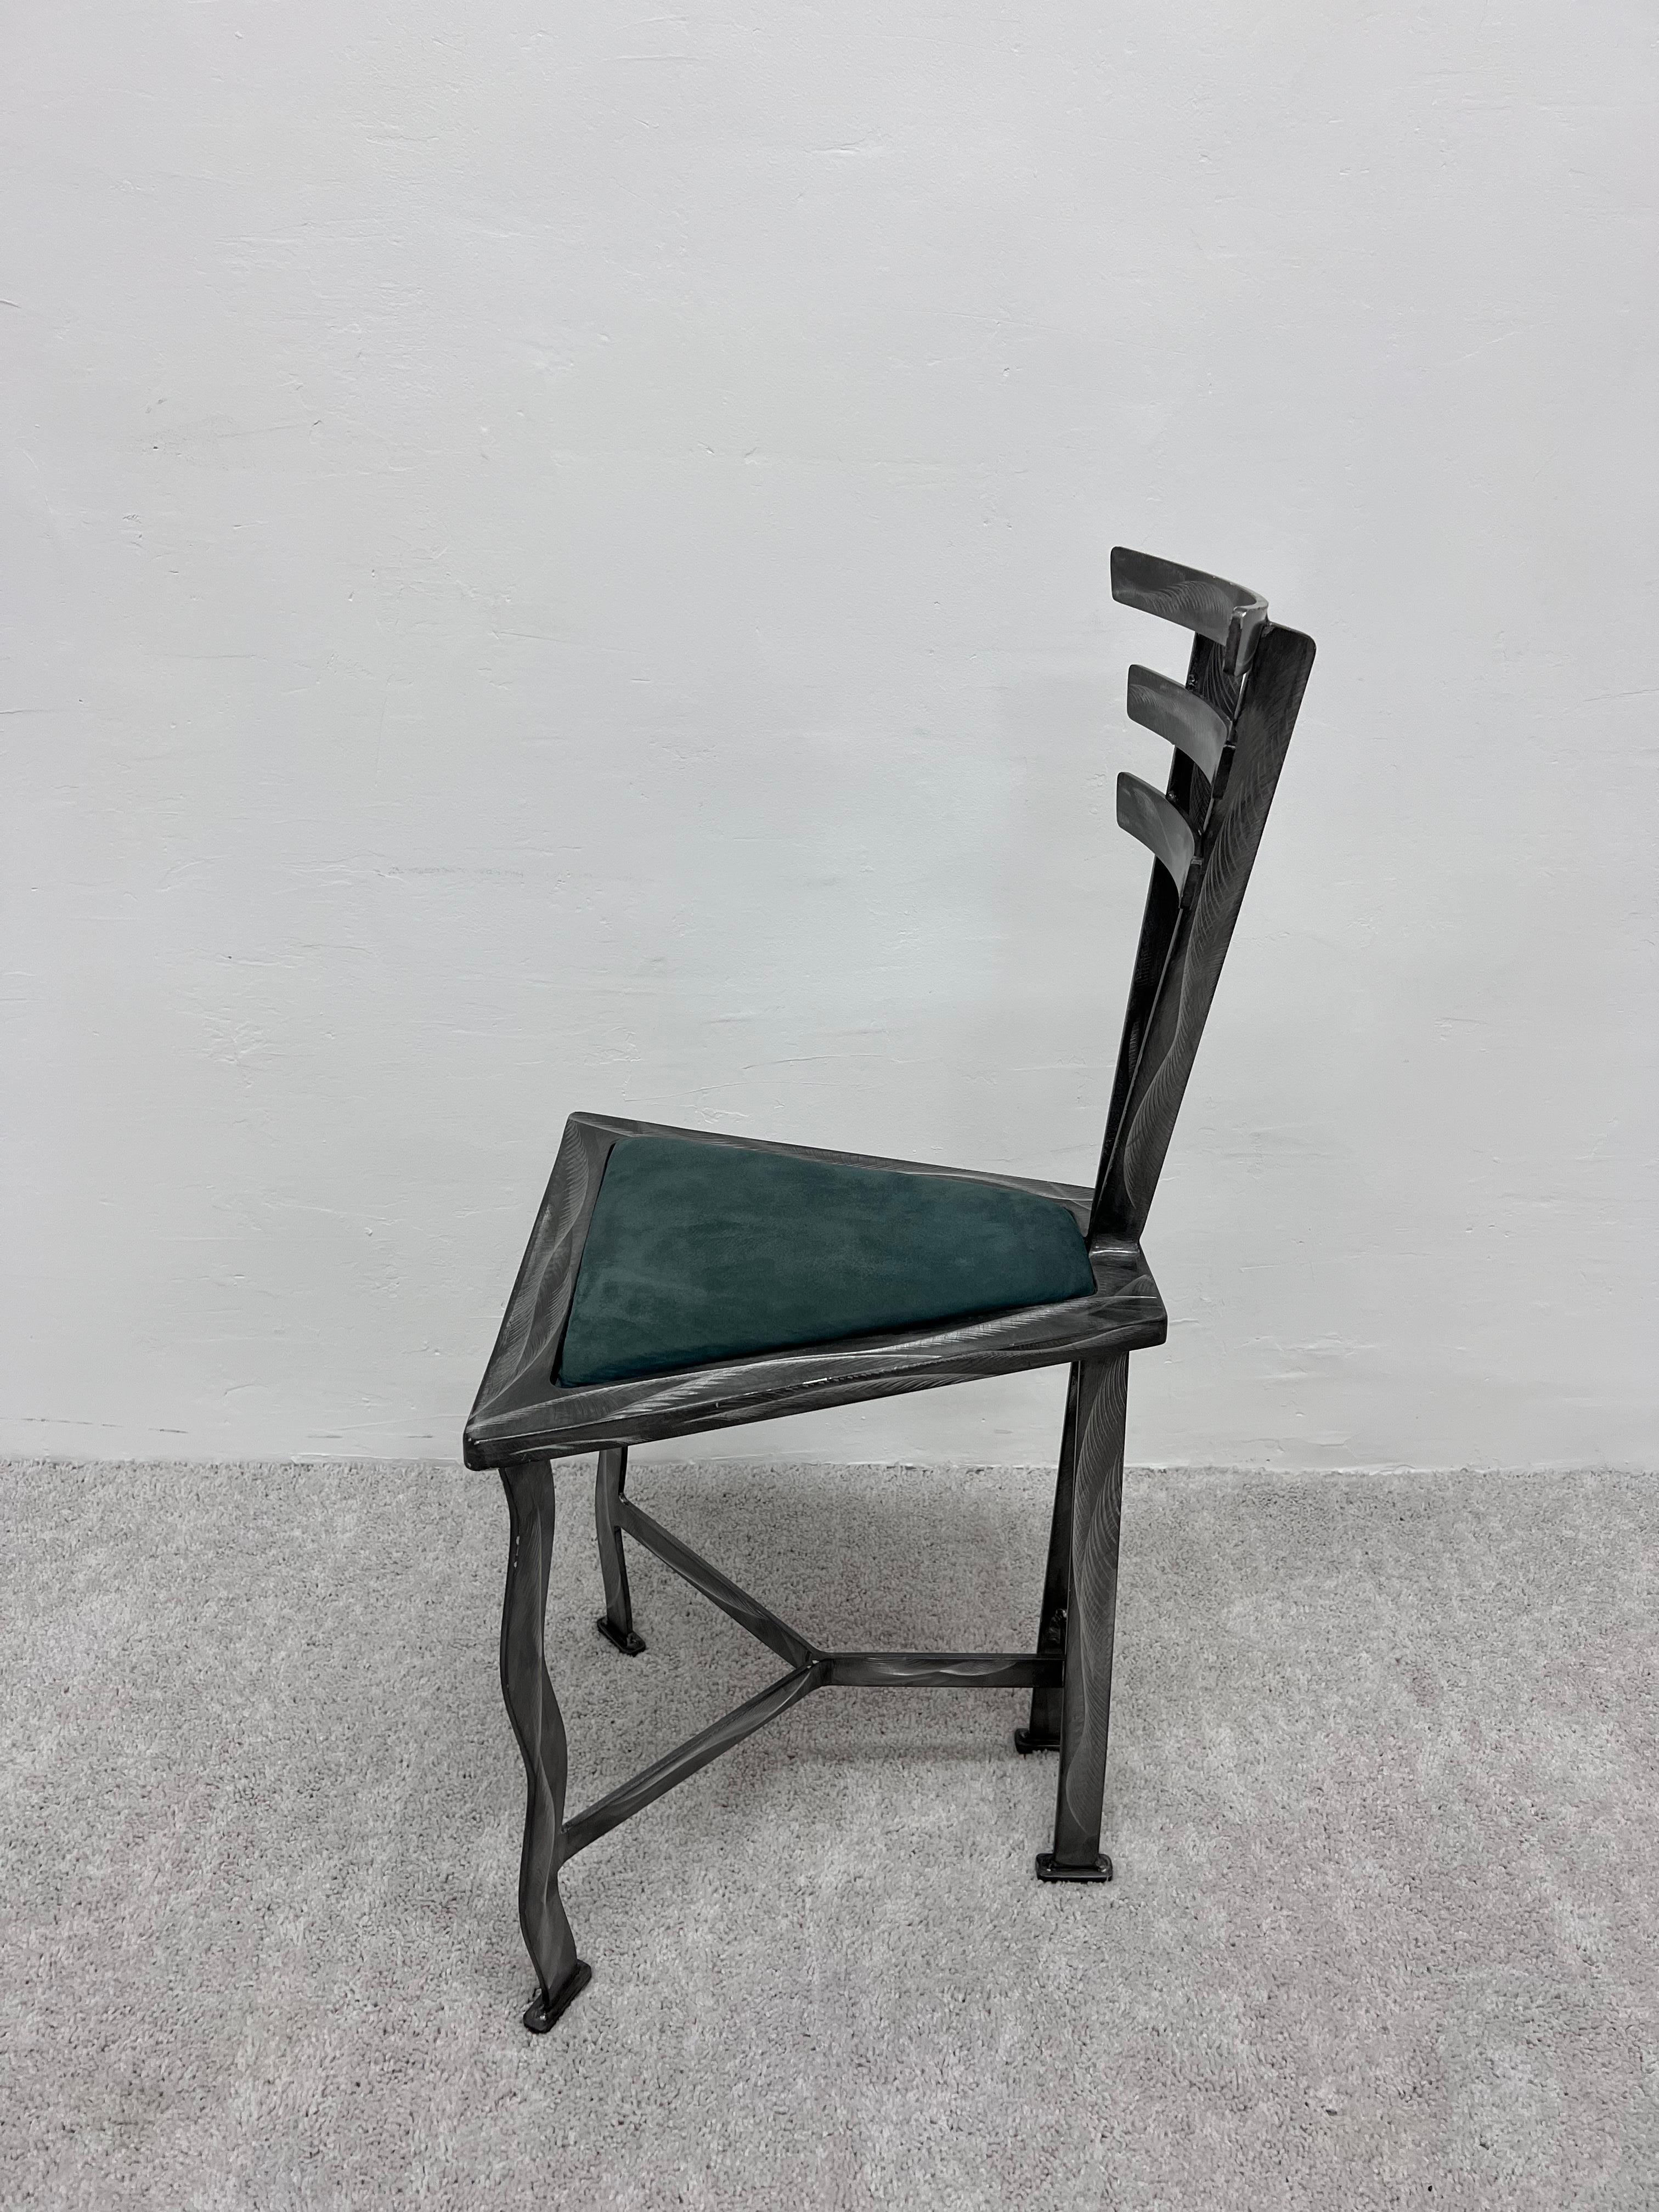 90s Postmodern Contemporary Welded Steel Studio Side Chairs, a Pair For Sale 2